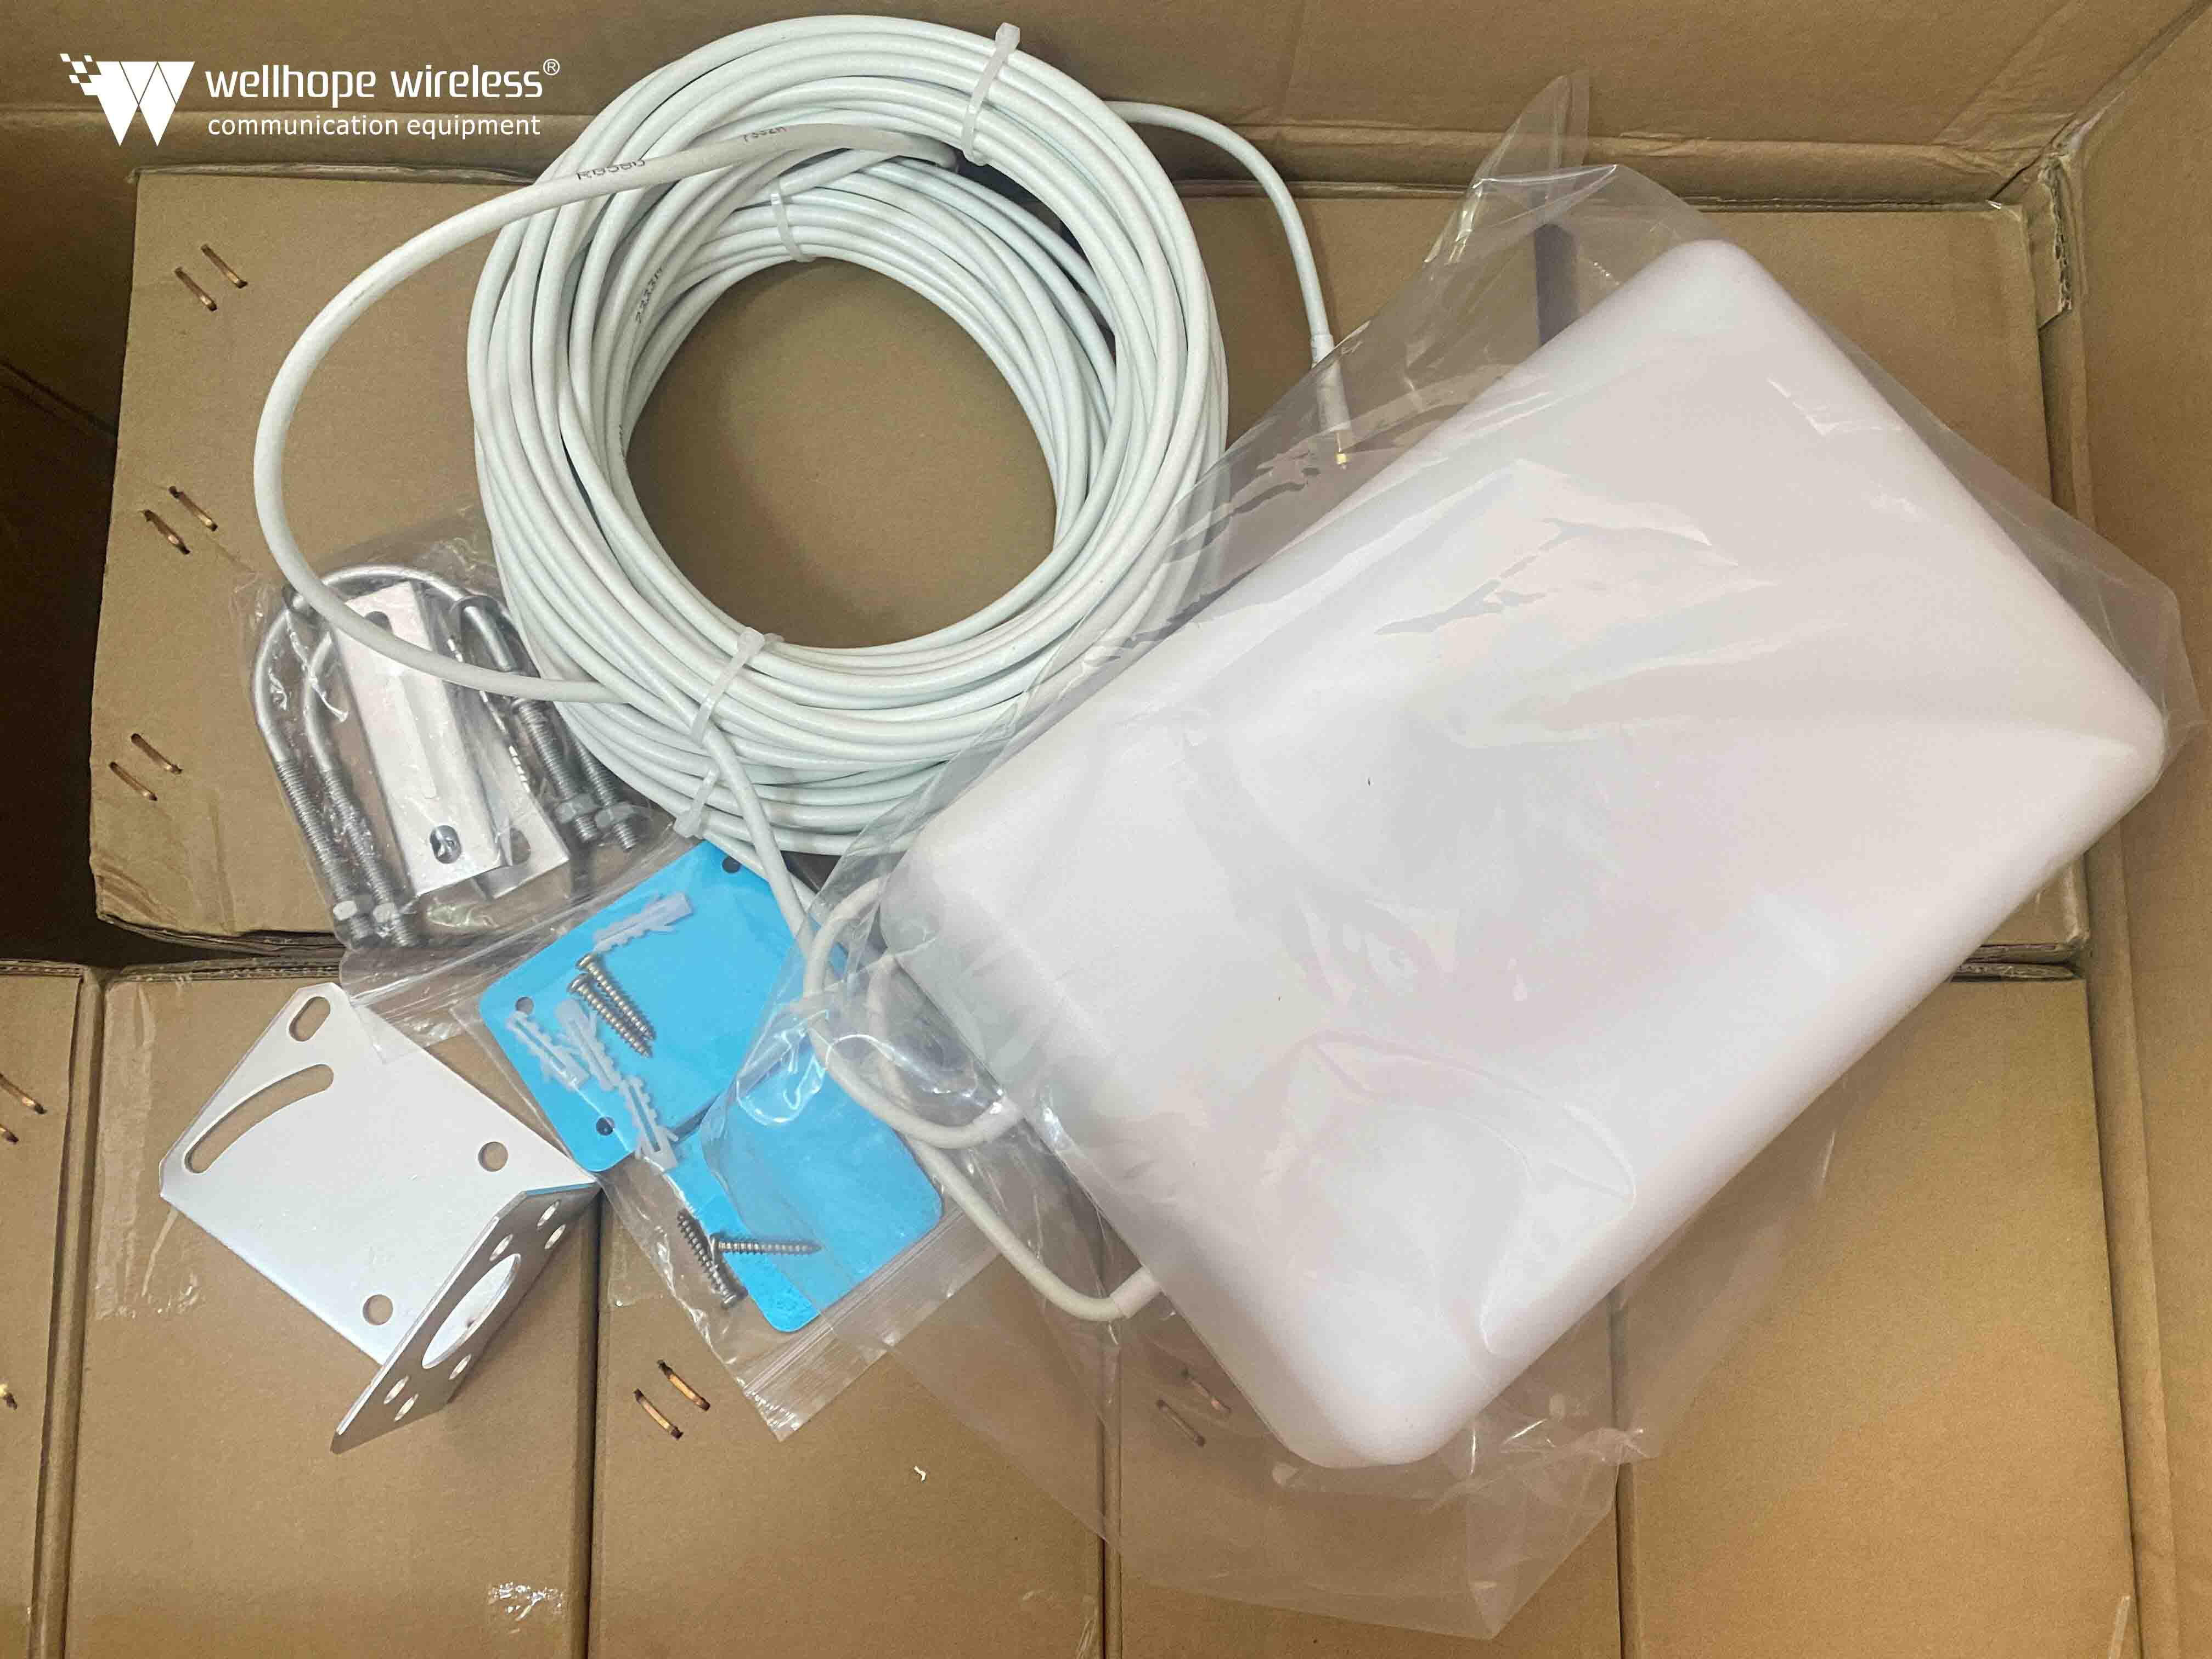  5G 4G indoor and outdoor patch antenna